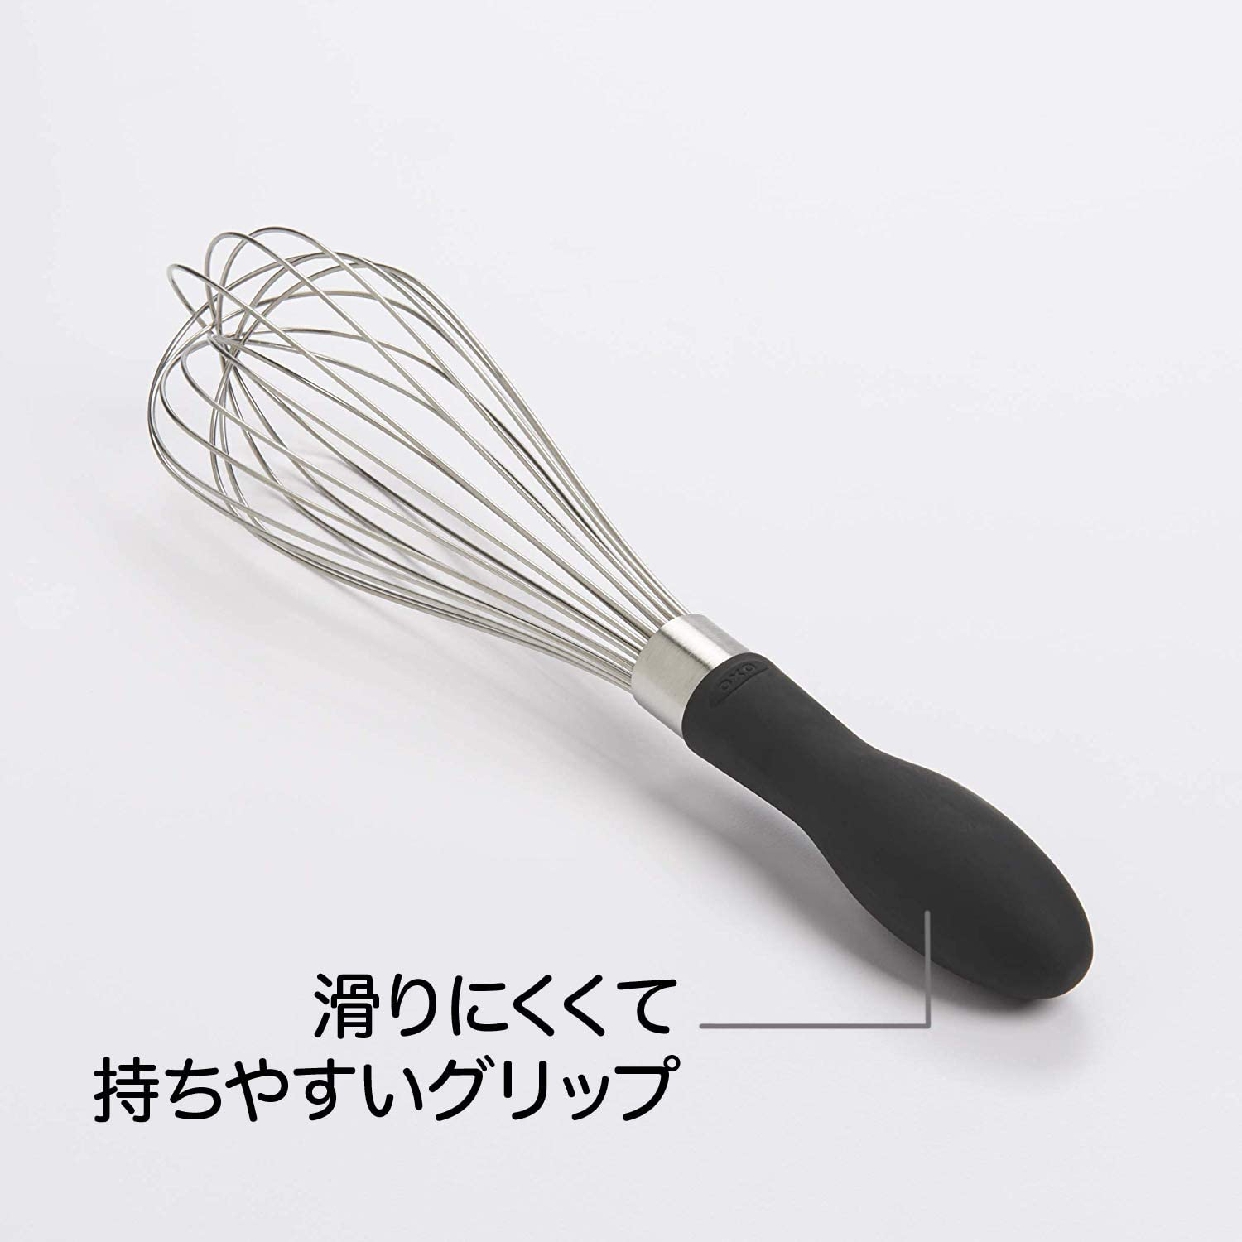 OXO(オクソー) 泡立て器 バルーンウィスク (小) 74091の商品画像サムネ3 